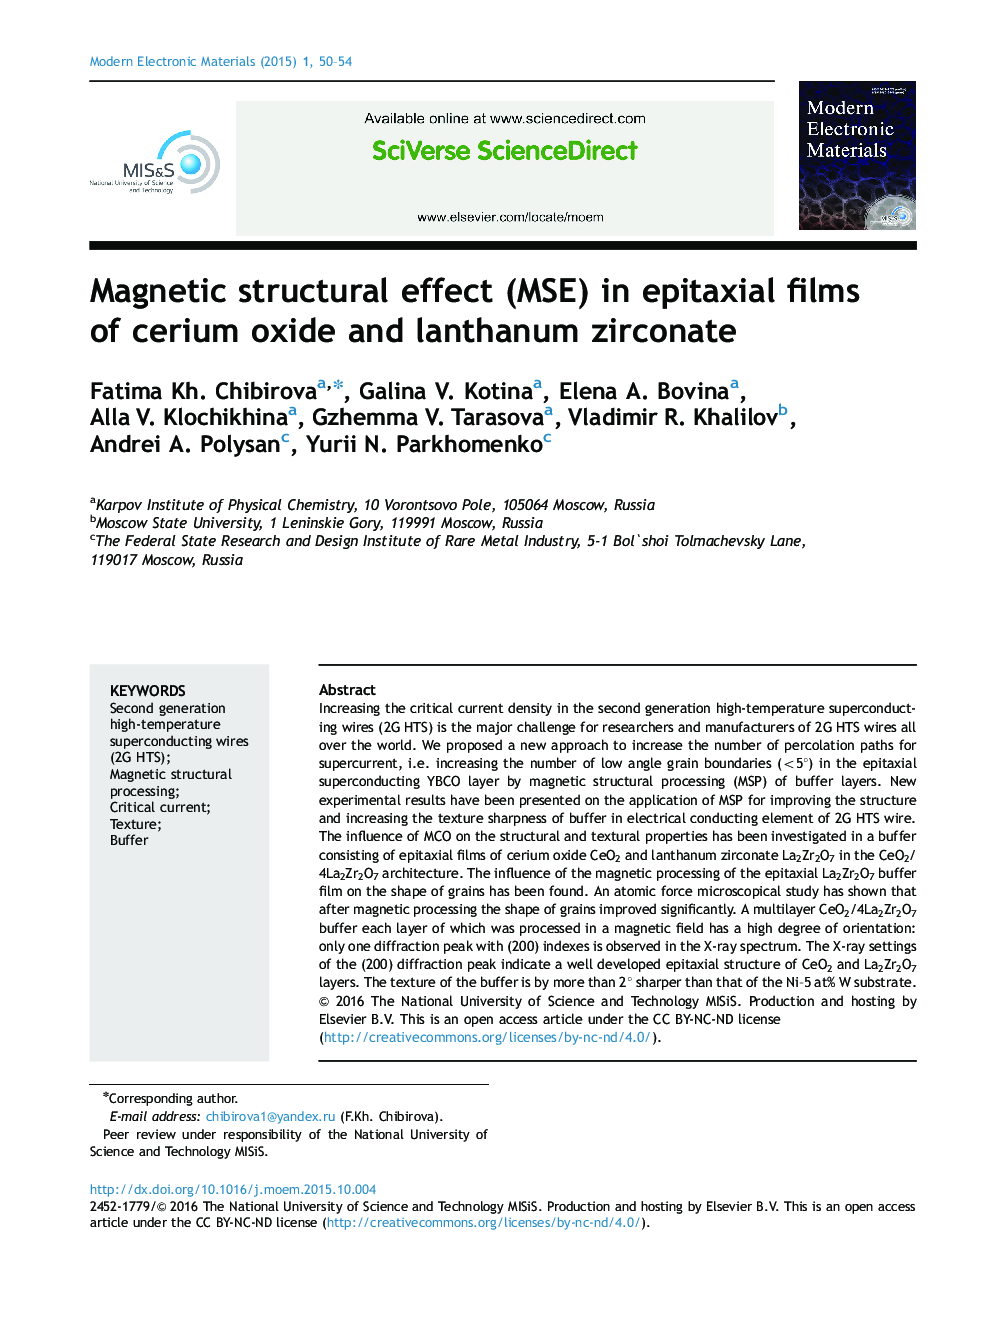 Magnetic structural effect (MSE) in epitaxial films of cerium oxide and lanthanum zirconate 